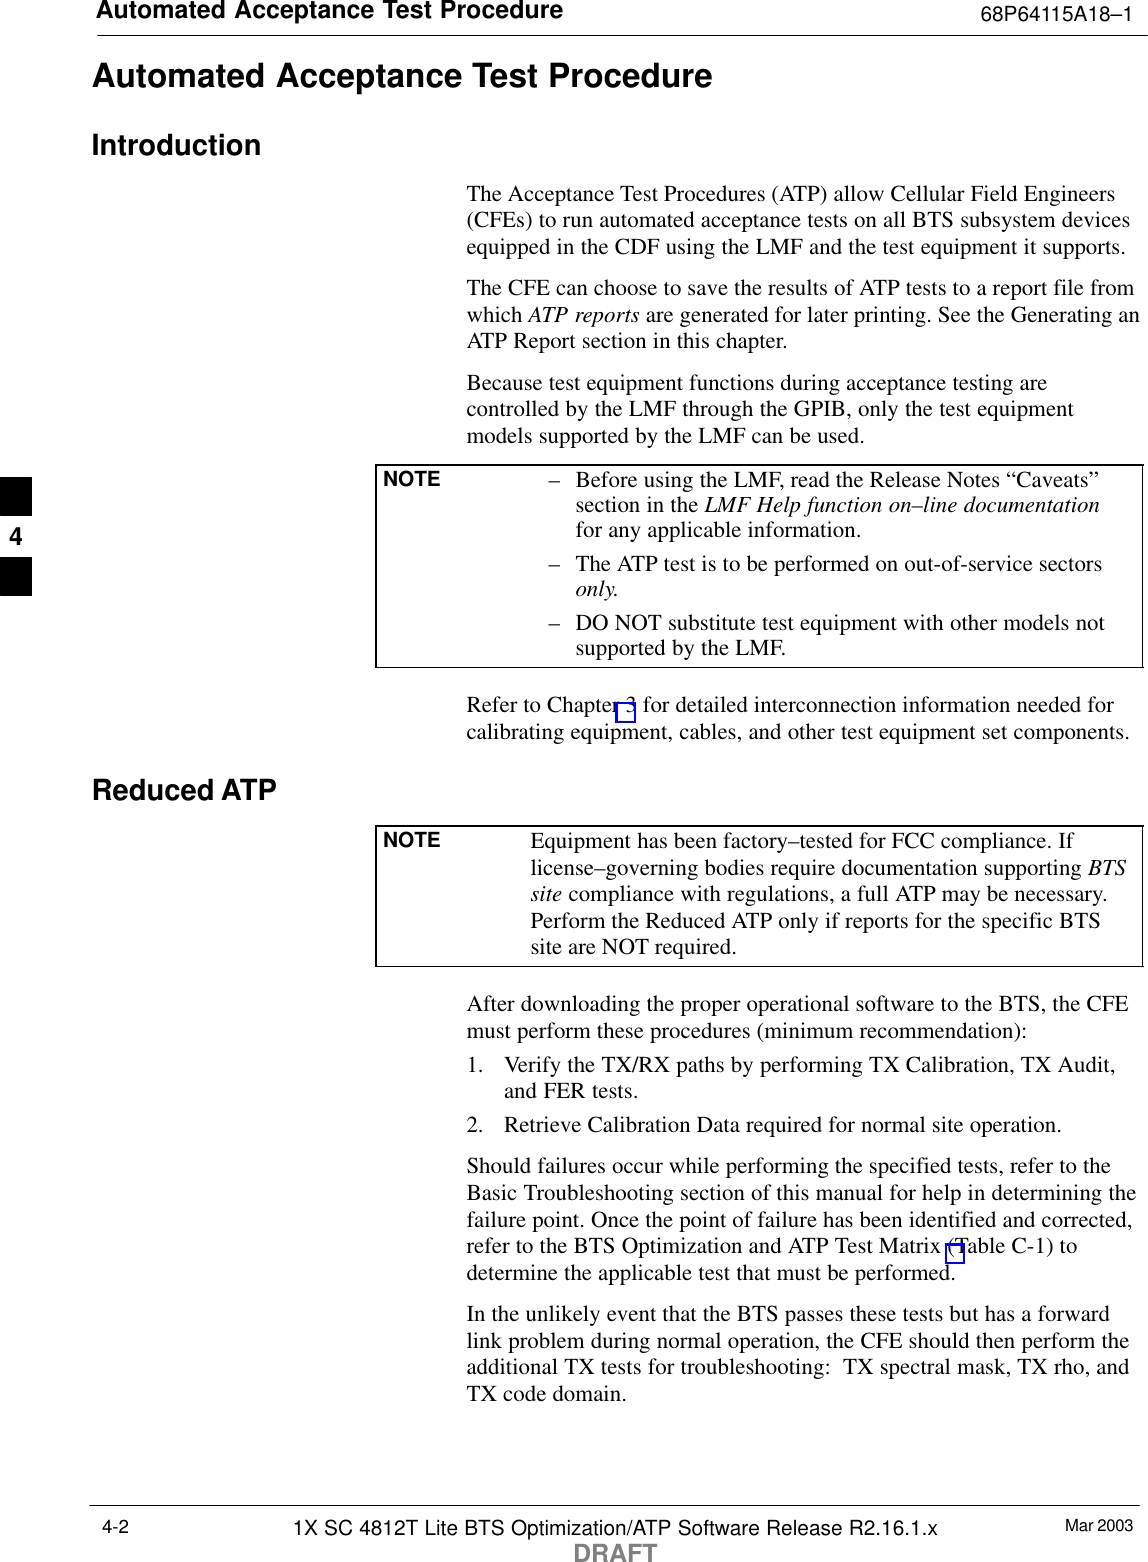 Automated Acceptance Test Procedure 68P64115A18–1Mar 20031X SC 4812T Lite BTS Optimization/ATP Software Release R2.16.1.xDRAFT4-2Automated Acceptance Test ProcedureIntroductionThe Acceptance Test Procedures (ATP) allow Cellular Field Engineers(CFEs) to run automated acceptance tests on all BTS subsystem devicesequipped in the CDF using the LMF and the test equipment it supports.The CFE can choose to save the results of ATP tests to a report file fromwhich ATP reports are generated for later printing. See the Generating anATP Report section in this chapter.Because test equipment functions during acceptance testing arecontrolled by the LMF through the GPIB, only the test equipmentmodels supported by the LMF can be used.NOTE – Before using the LMF, read the Release Notes “Caveats”section in the LMF Help function on–line documentationfor any applicable information.– The ATP test is to be performed on out-of-service sectorsonly.– DO NOT substitute test equipment with other models notsupported by the LMF.Refer to Chapter 3 for detailed interconnection information needed forcalibrating equipment, cables, and other test equipment set components.Reduced ATPNOTE Equipment has been factory–tested for FCC compliance. Iflicense–governing bodies require documentation supporting BTSsite compliance with regulations, a full ATP may be necessary.Perform the Reduced ATP only if reports for the specific BTSsite are NOT required.After downloading the proper operational software to the BTS, the CFEmust perform these procedures (minimum recommendation):1. Verify the TX/RX paths by performing TX Calibration, TX Audit,and FER tests.2. Retrieve Calibration Data required for normal site operation.Should failures occur while performing the specified tests, refer to theBasic Troubleshooting section of this manual for help in determining thefailure point. Once the point of failure has been identified and corrected,refer to the BTS Optimization and ATP Test Matrix (Table C-1) todetermine the applicable test that must be performed.In the unlikely event that the BTS passes these tests but has a forwardlink problem during normal operation, the CFE should then perform theadditional TX tests for troubleshooting:  TX spectral mask, TX rho, andTX code domain.4